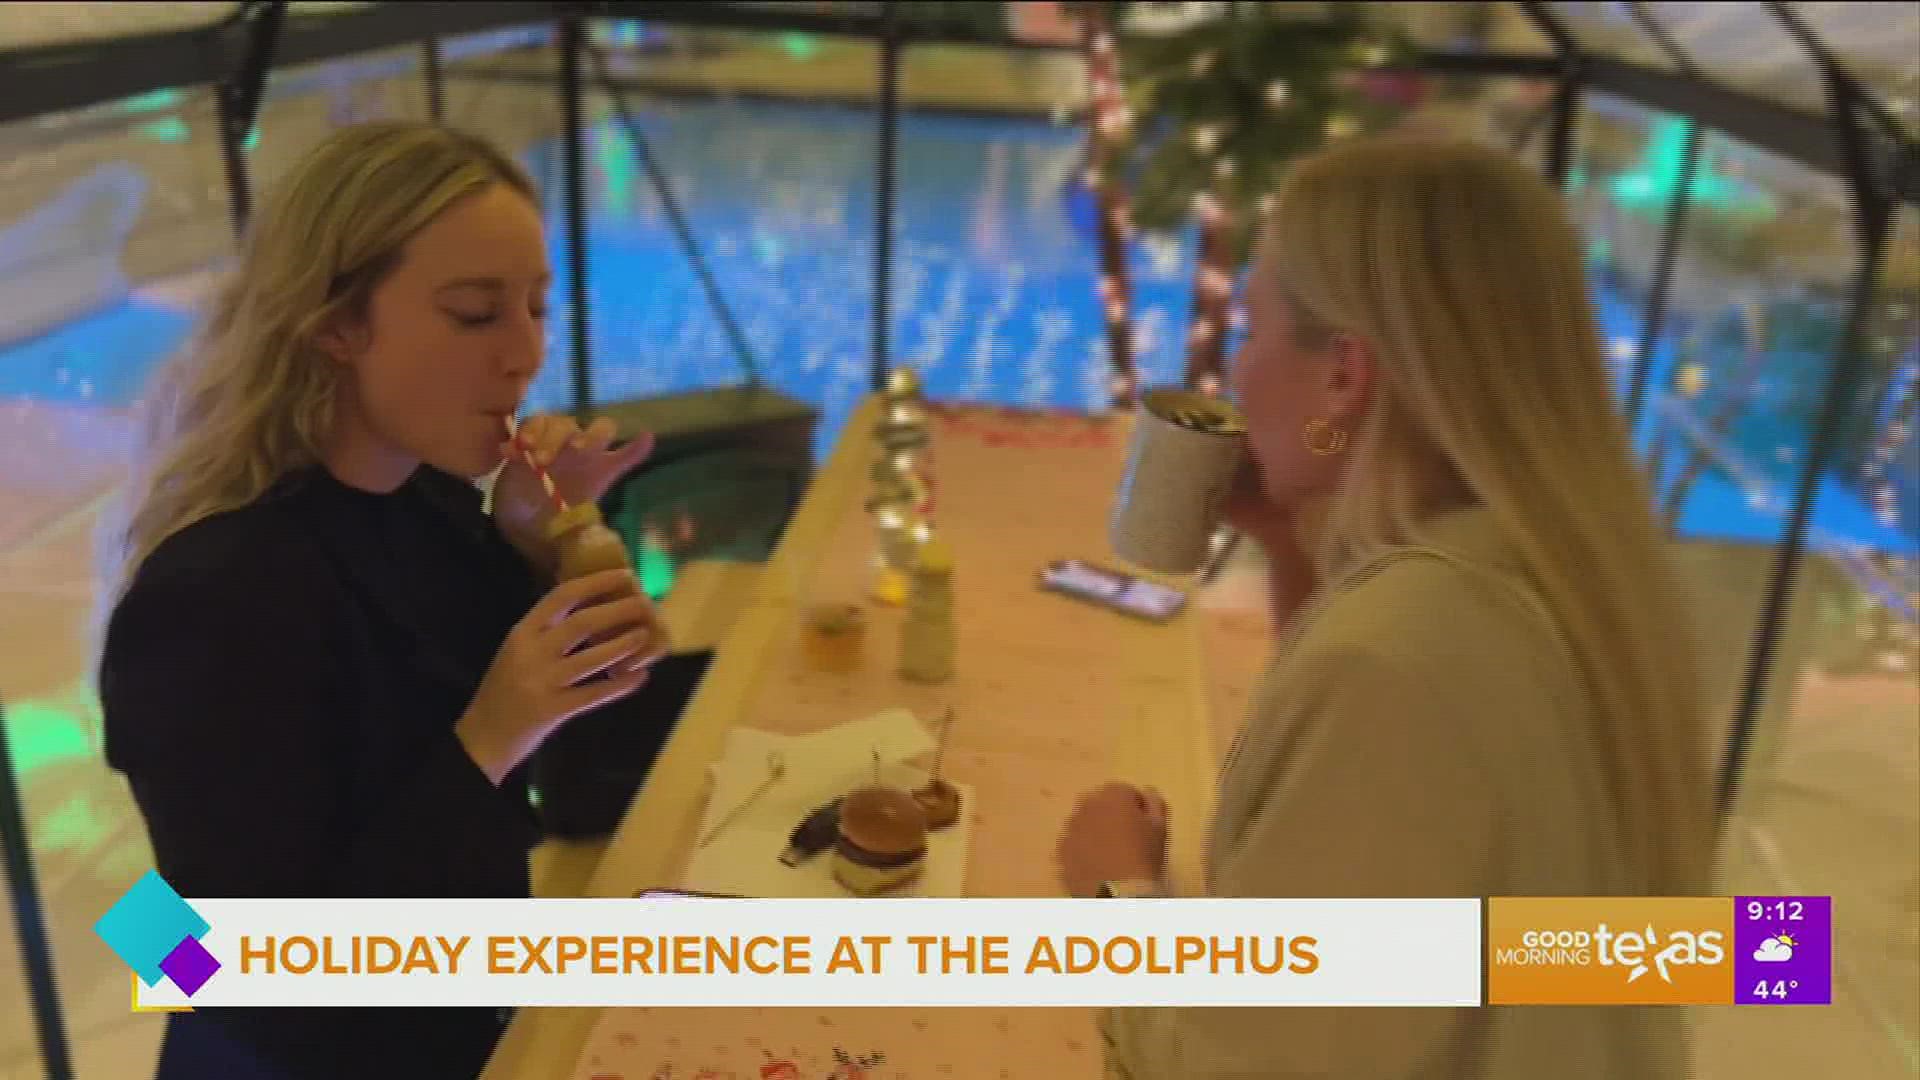 Hannah hits the streets of North Texas to show you some fun places to get festive with the whole family. First stop on the list: The Adolphus.